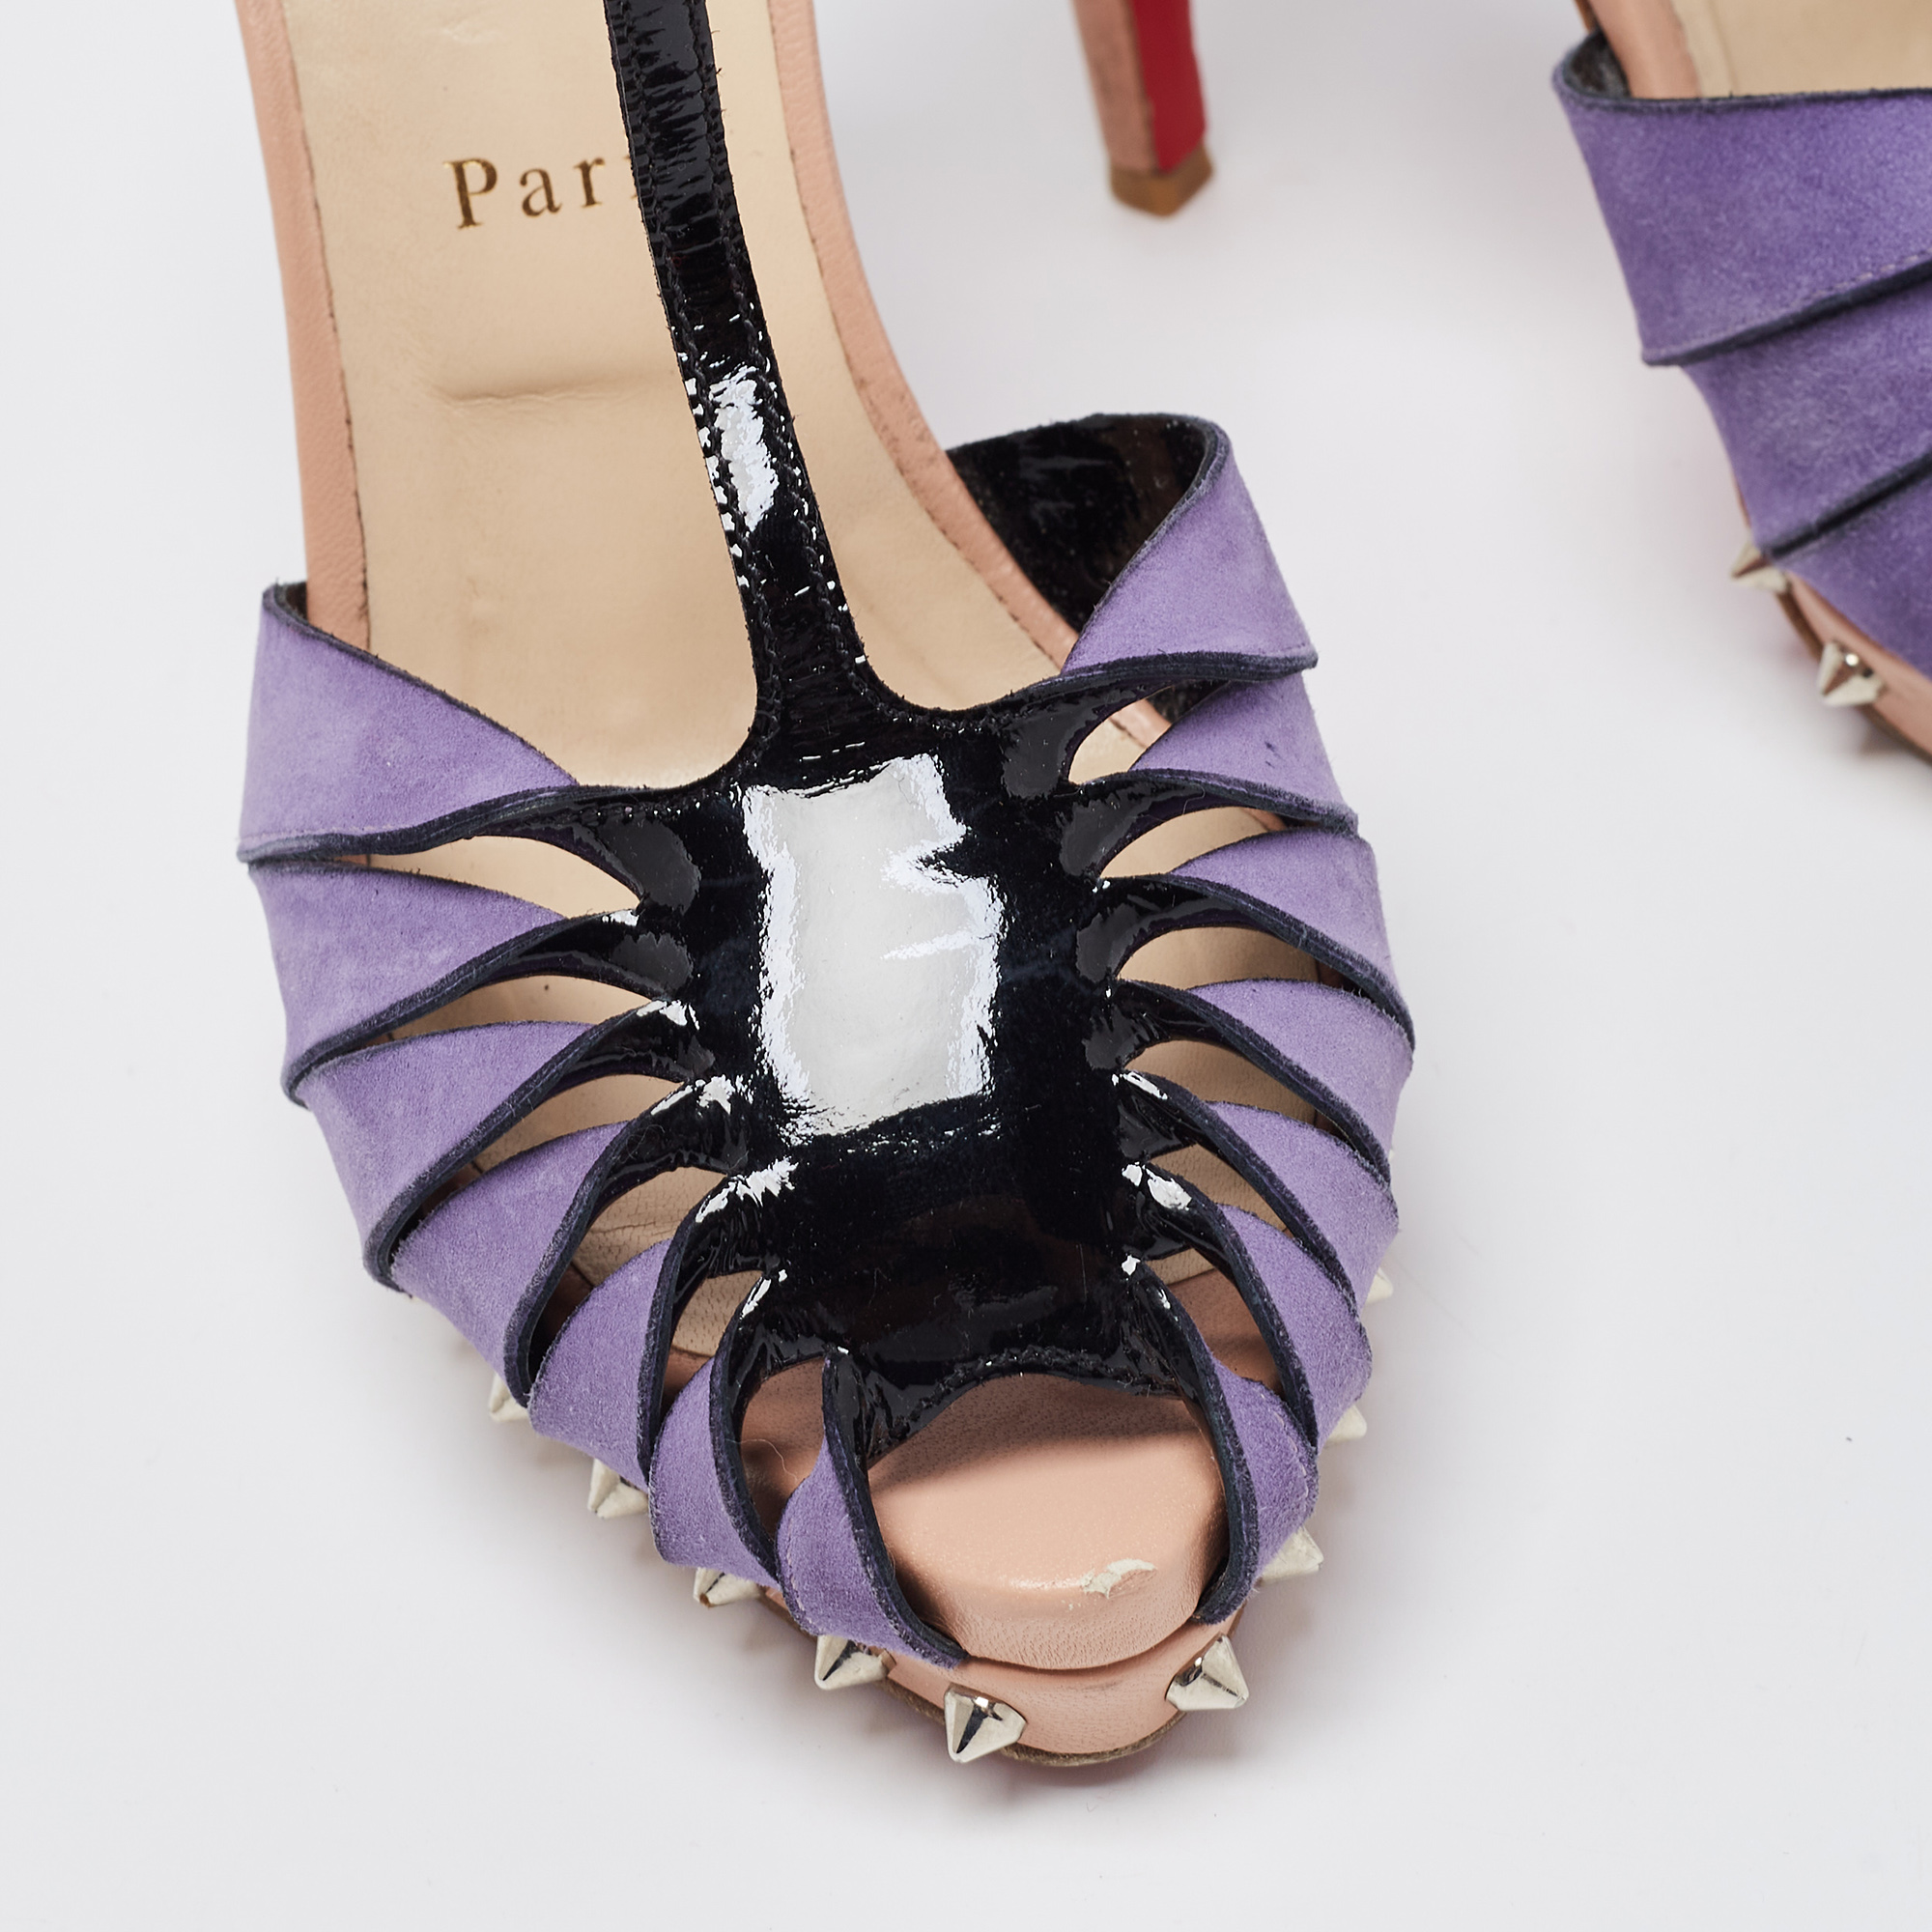 Christian Louboutin Purple/Black Suede And Patent Leather Zigounette Spiked Slingback Sandals Size 38.5